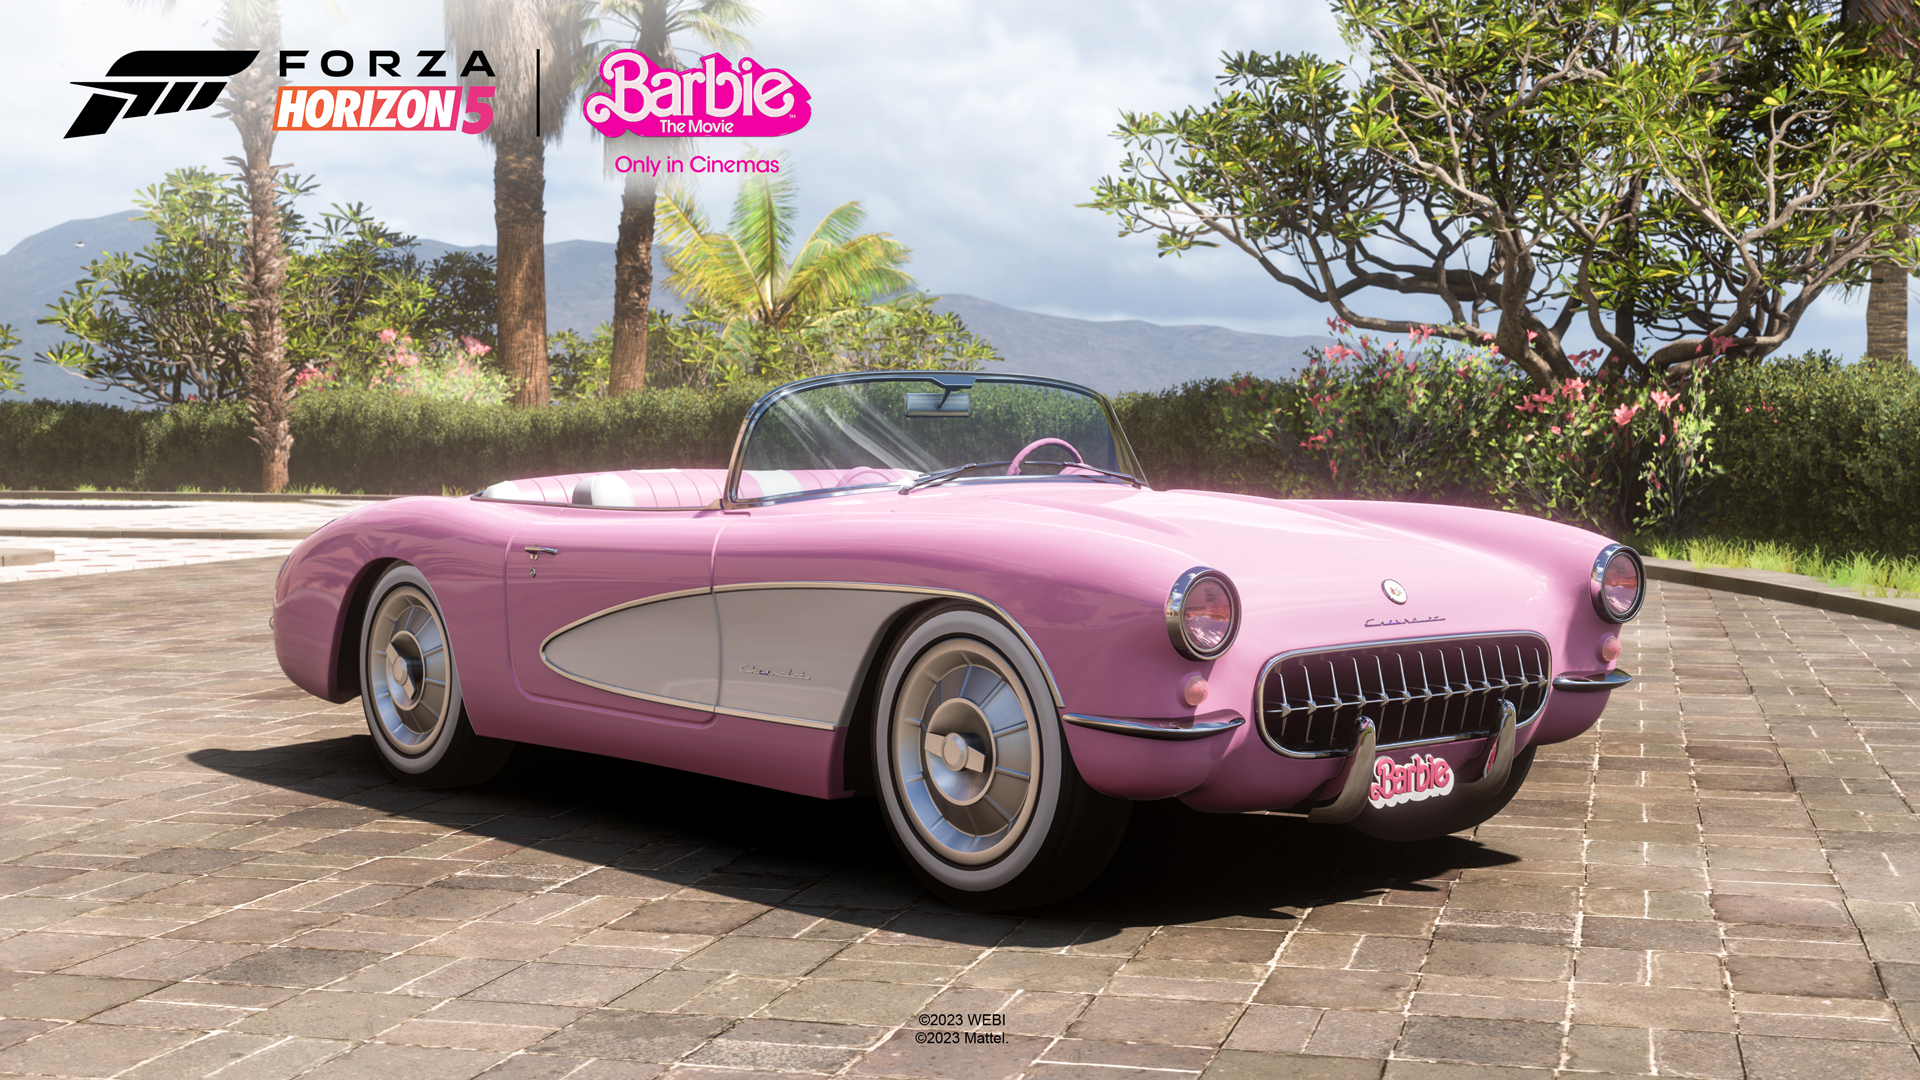 a hot-pink Barbie Xbox with its own adorable Dreamhouse exists, but you'll need luck to get one